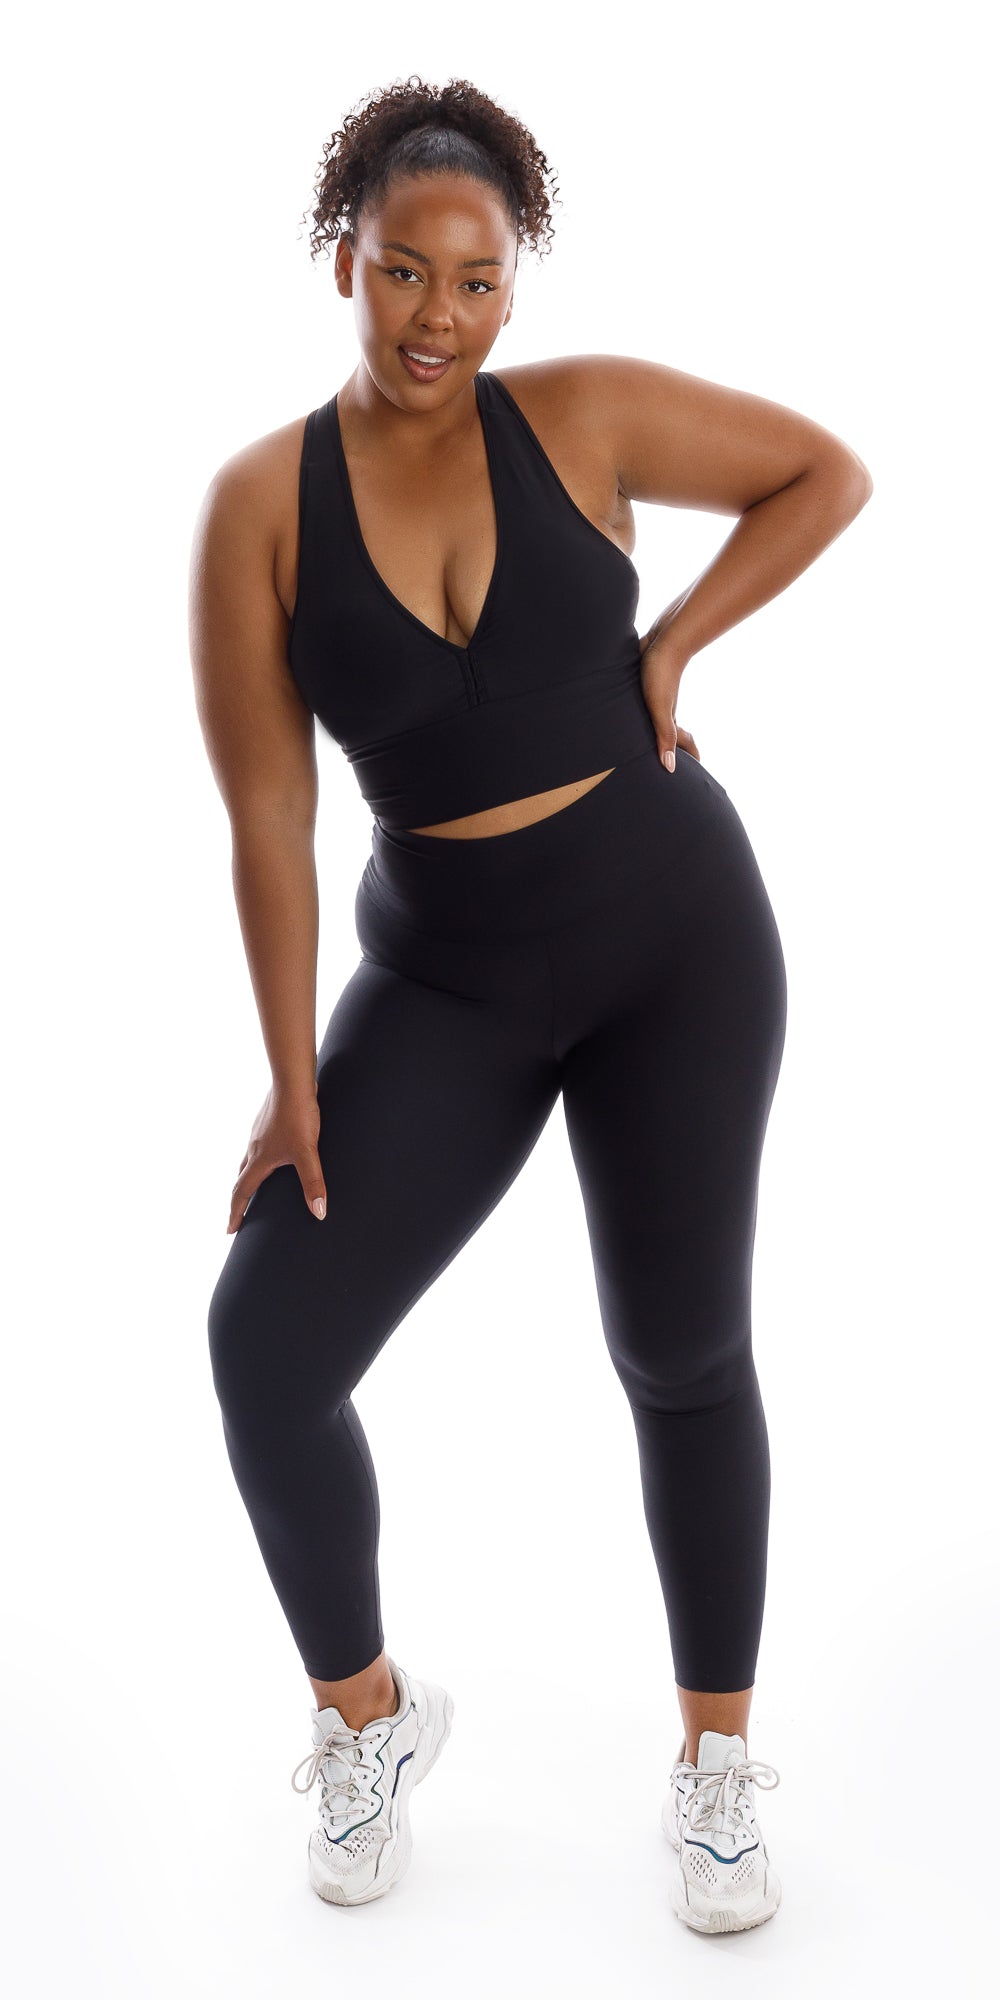 Full body front view of girl wearing black Midnight Eco Ultra High Waist Leggings and matching bra leaning on right leg and putting left hand on waist